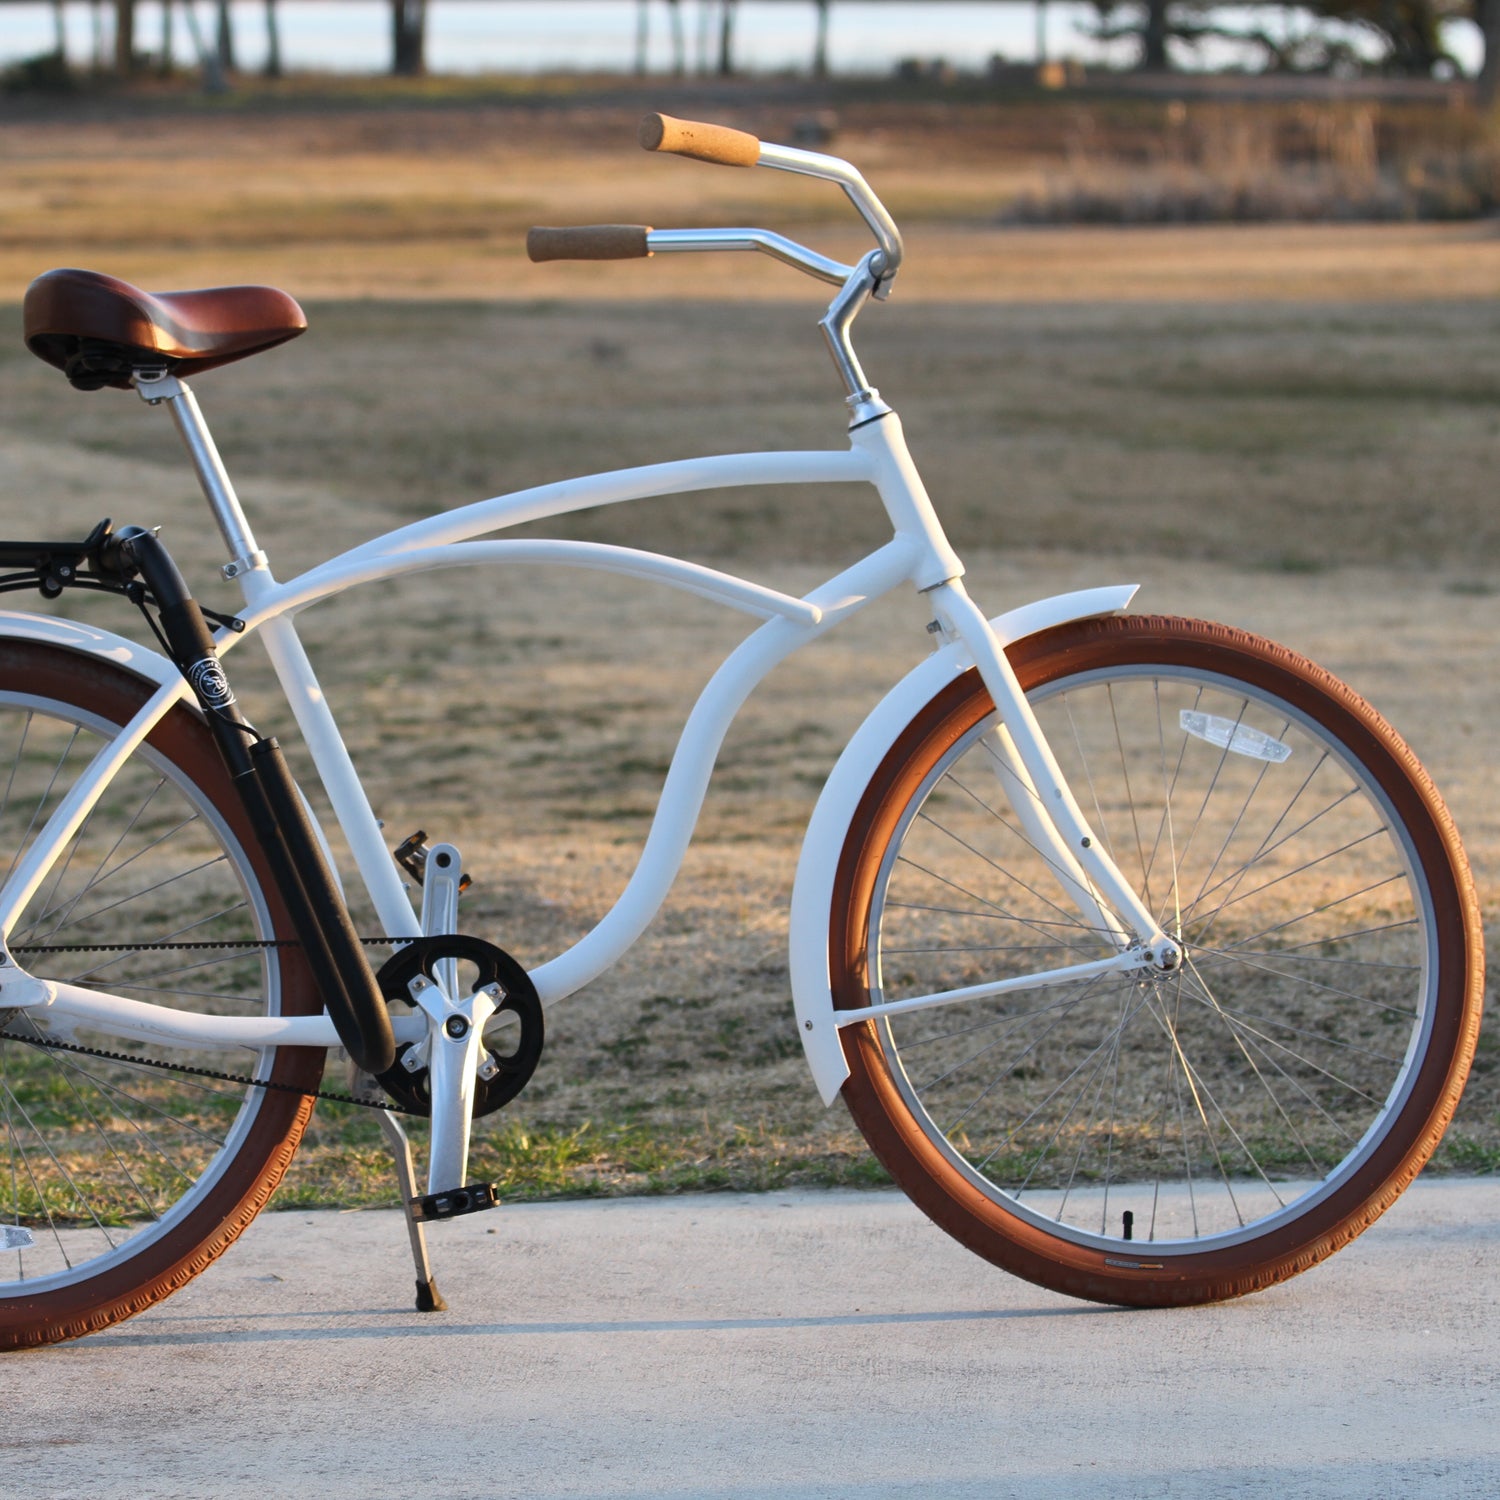 If You Live Near the Beach, You Need This Bike